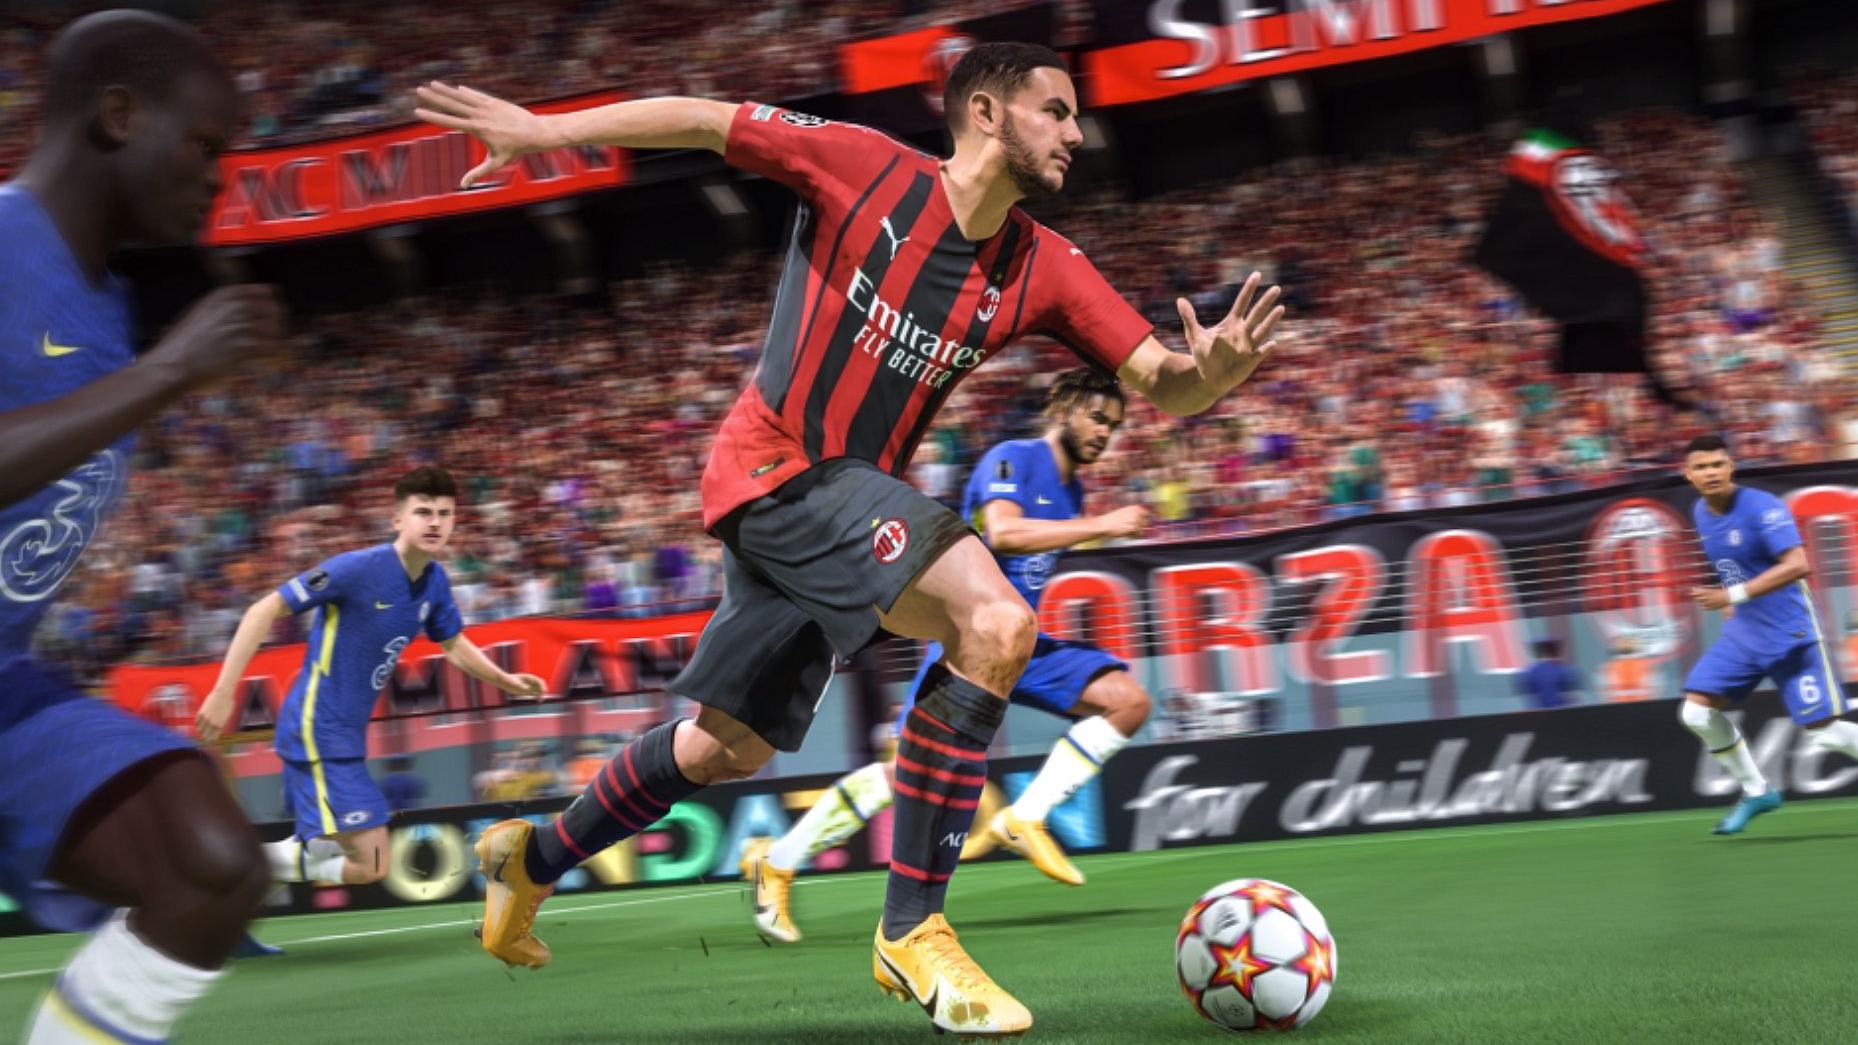 FIFA 22 screenshot showing a player running with the ball